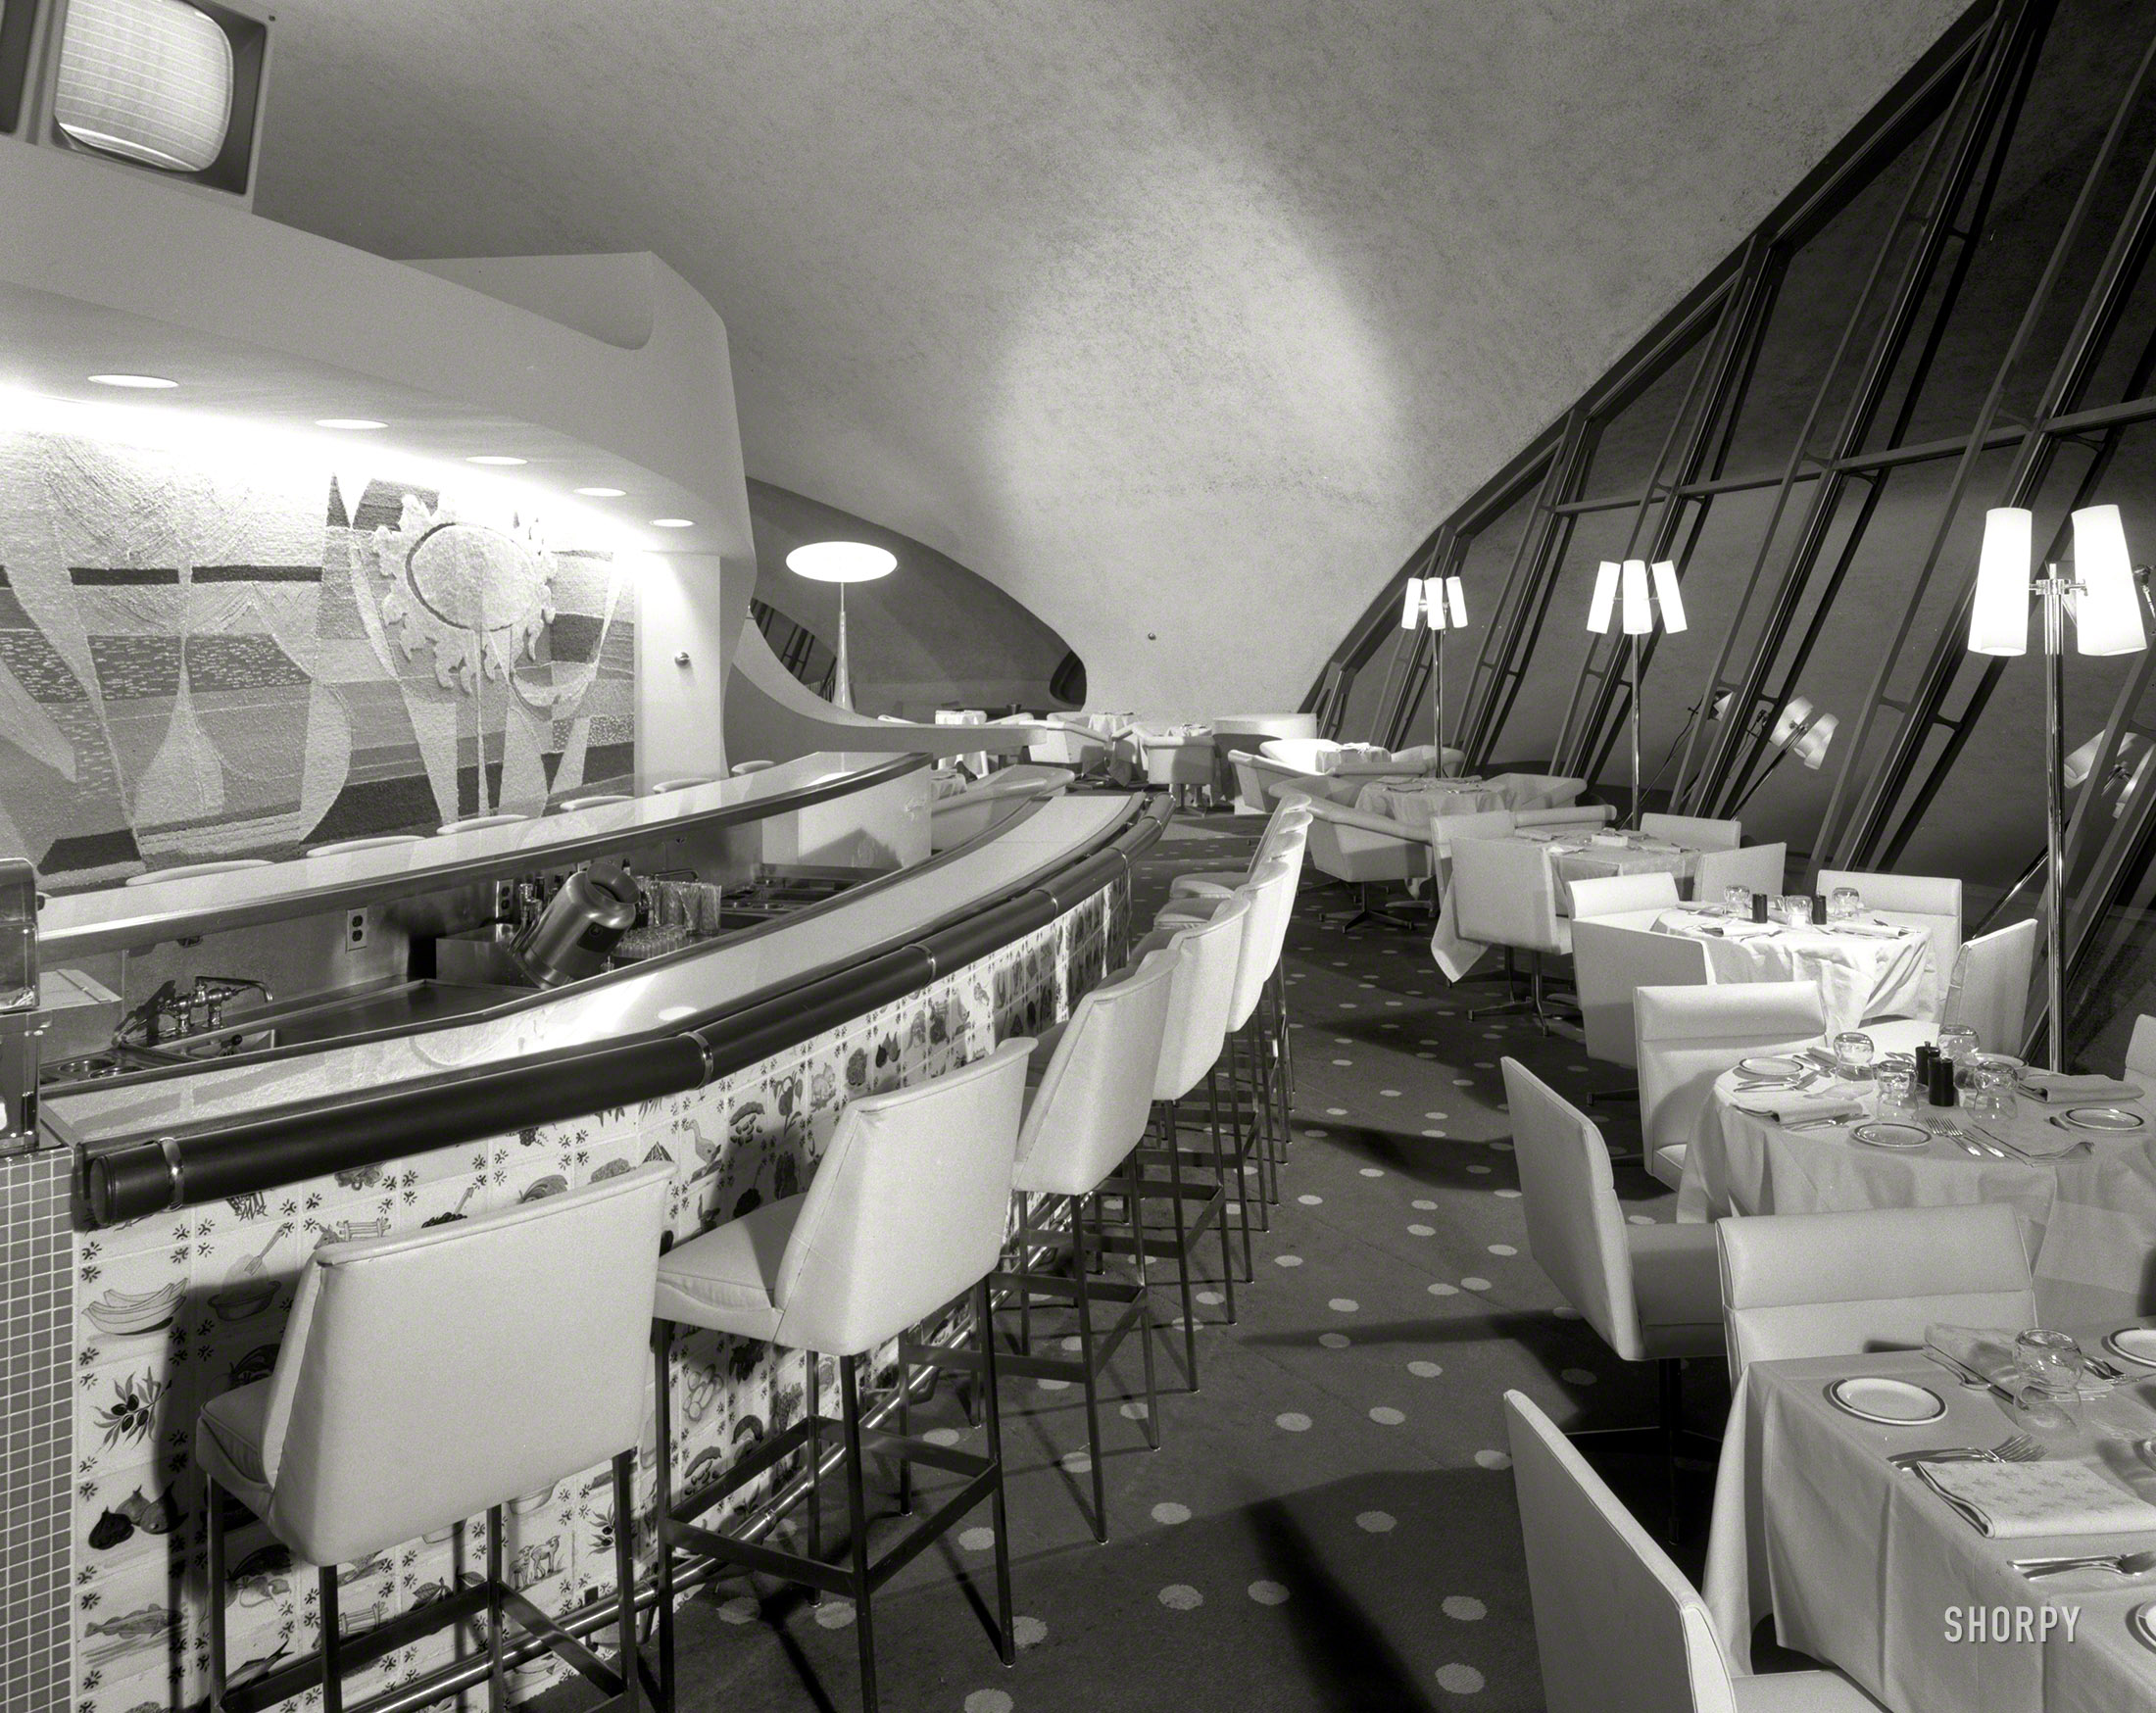 August 29, 1962. New York. "TWA terminal, Idlewild. Union News restaurants -- Lisbon Lounge II. Raymond Loewy." Nowadays of course we have Sbarro's and Panda Express at the airport, but 50 years ago people had to make do with this. Large-format safety negative by Gottscho-Schleisner. View full size.